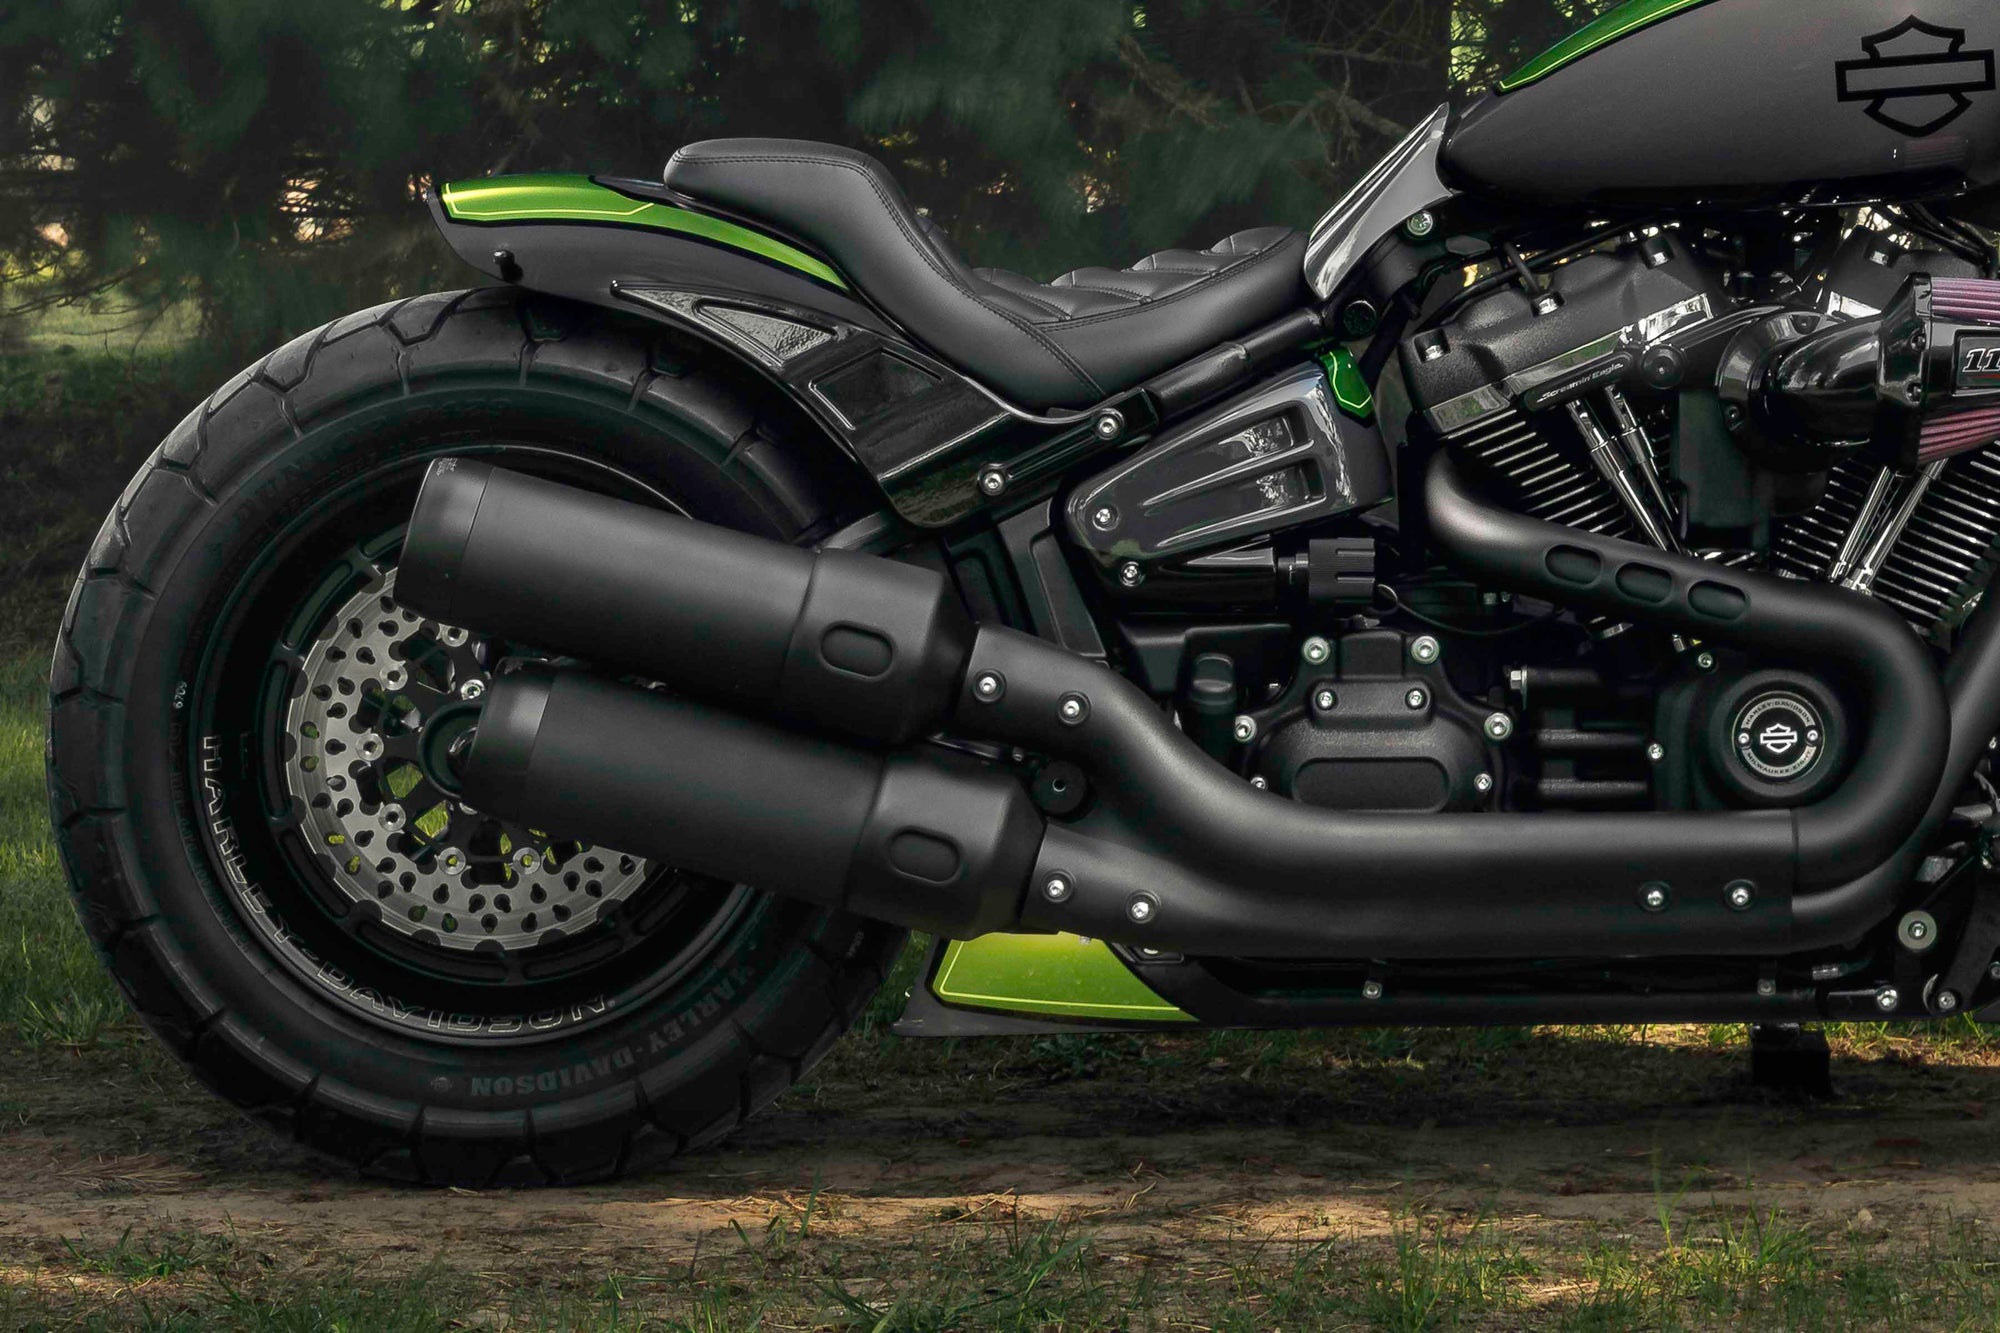 Zoomed Harley Davidson Fat Bob motorcycle with Killer Custom parts from the side with some trees in the background